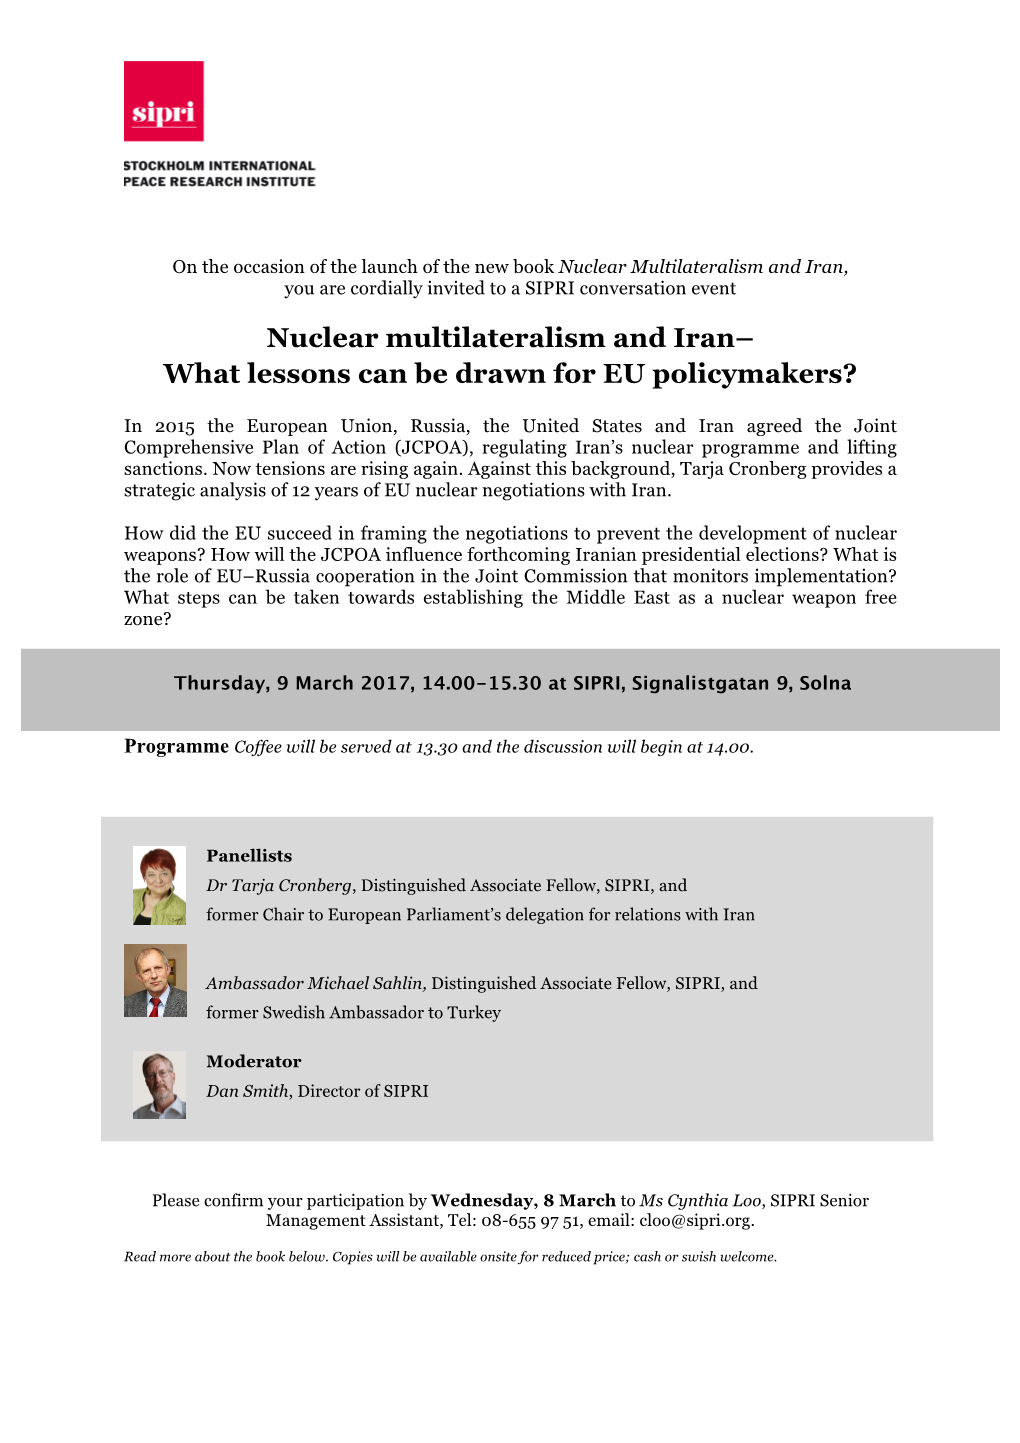 Nuclear Multilateralism and Iran, You Are Cordially Invited to a SIPRI Conversation Event